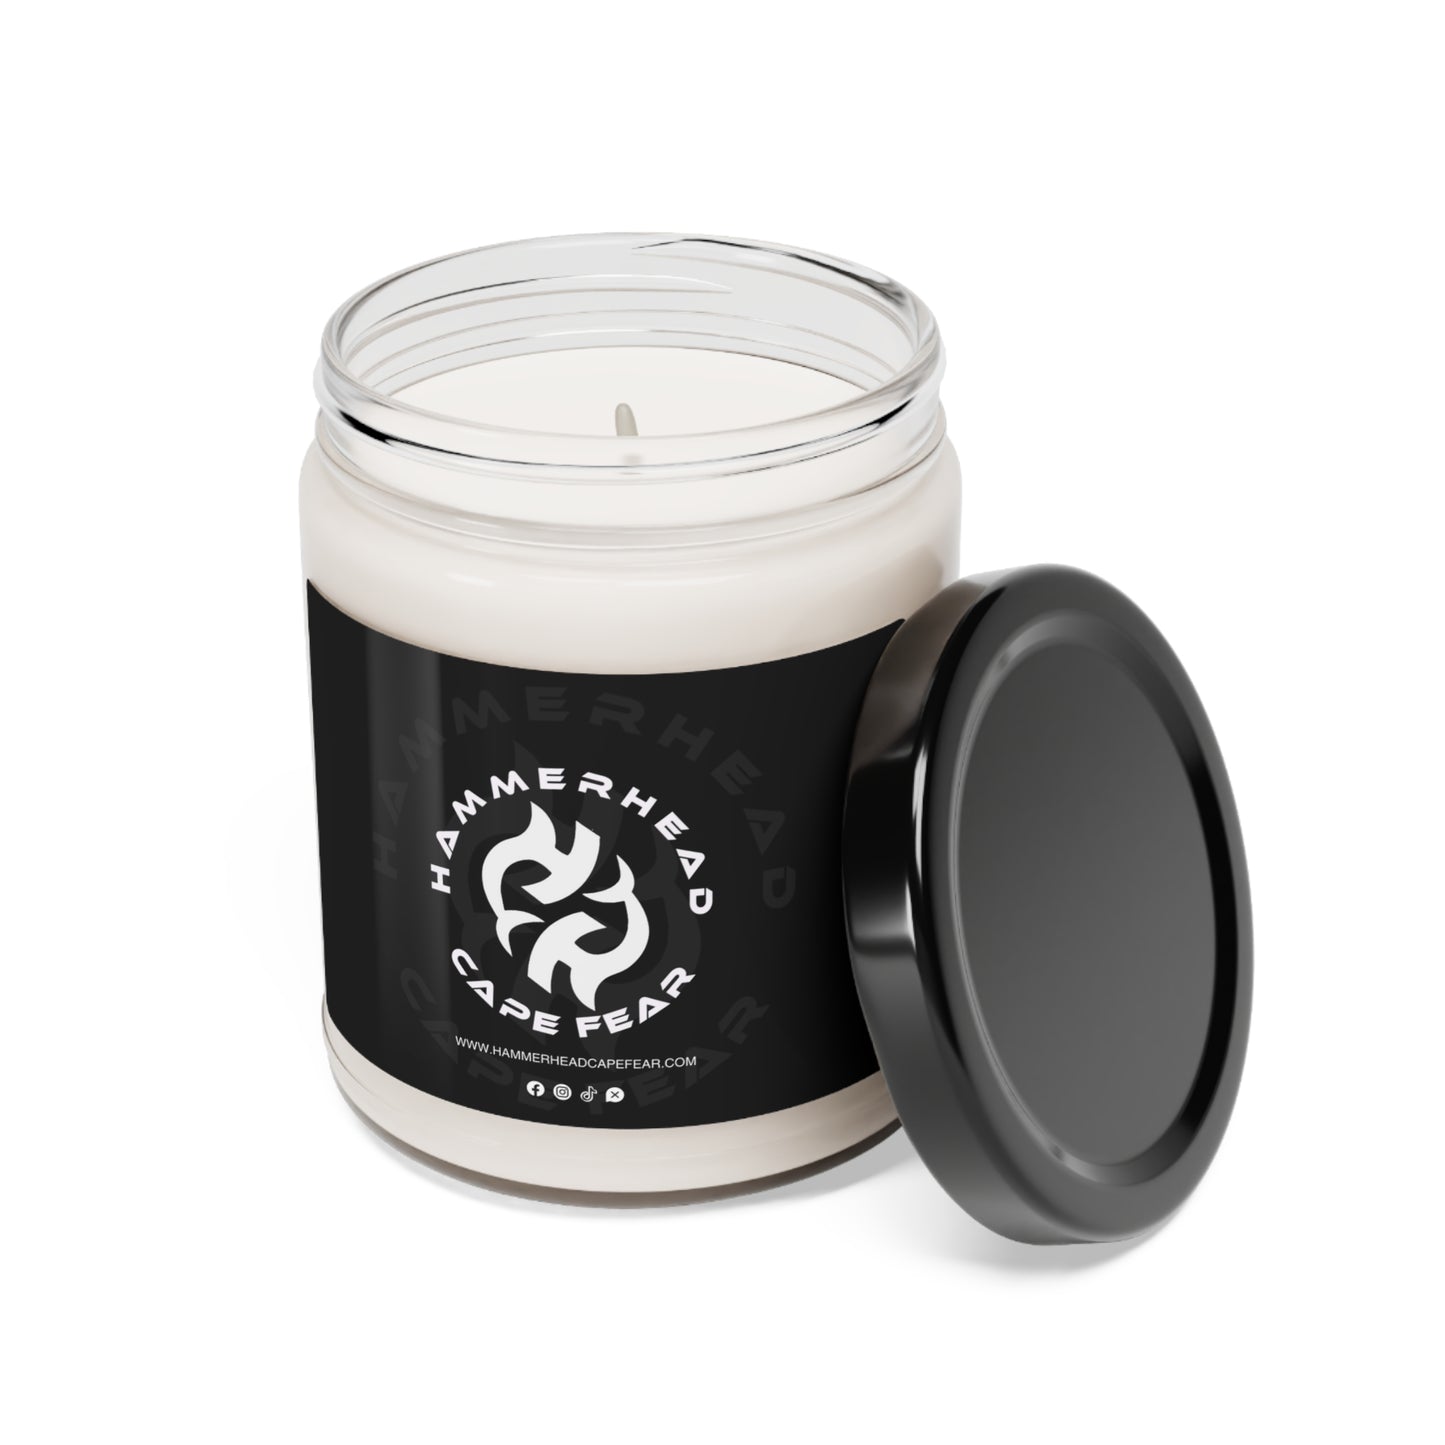 Zen Shark Scented Soy Candle, 9oz